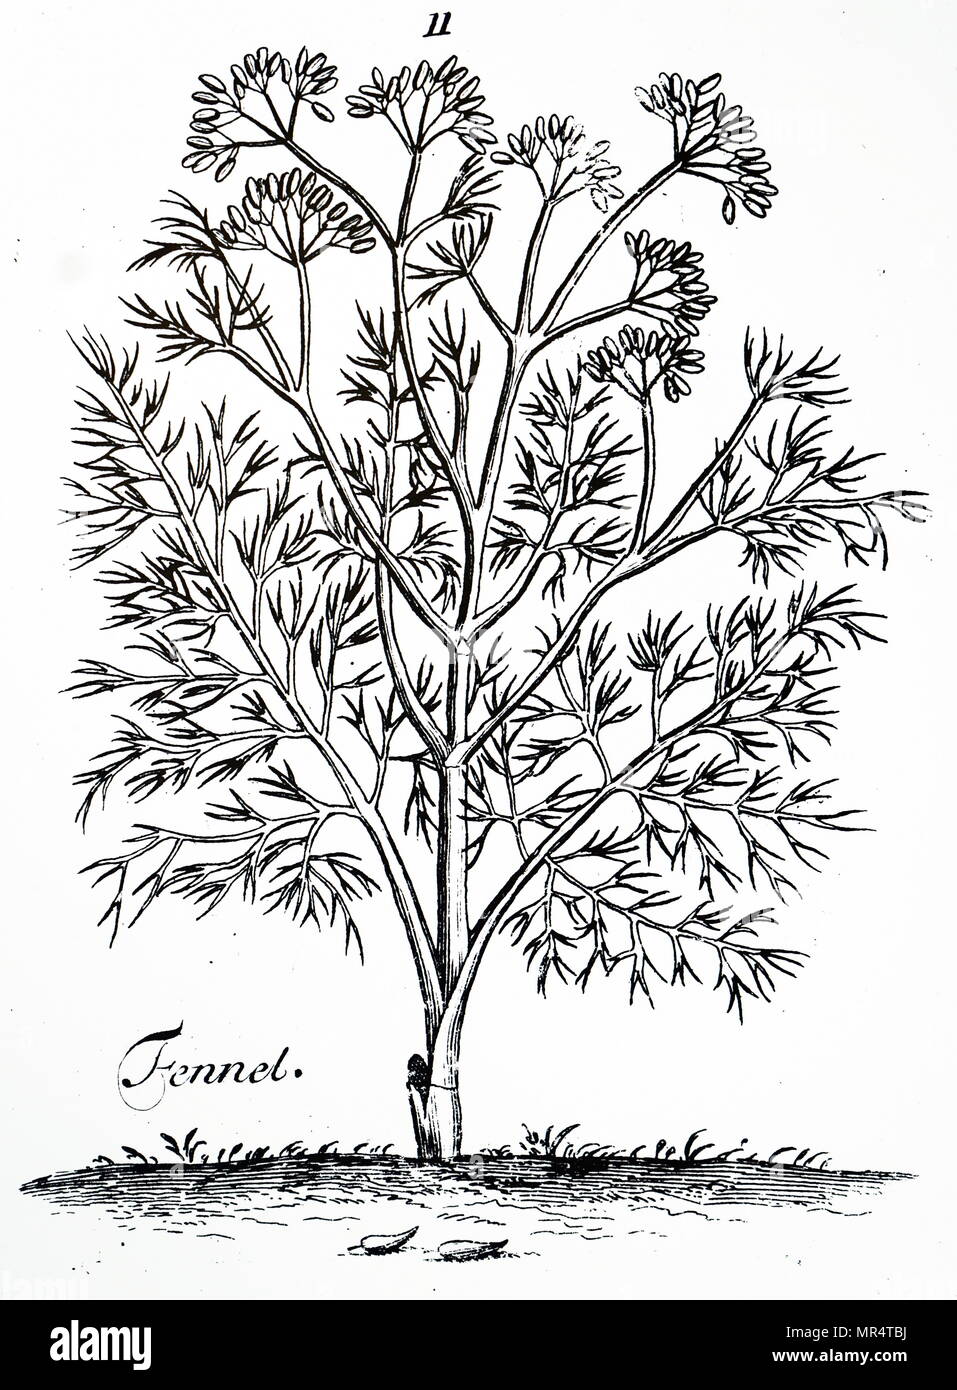 Engraving depicting a sample of sweet fennel. Fennel is a flowering plant species in the carrot family. It is a hardy perennial herb with yellow flowers and feathery leaves. Dated 18th century Stock Photo